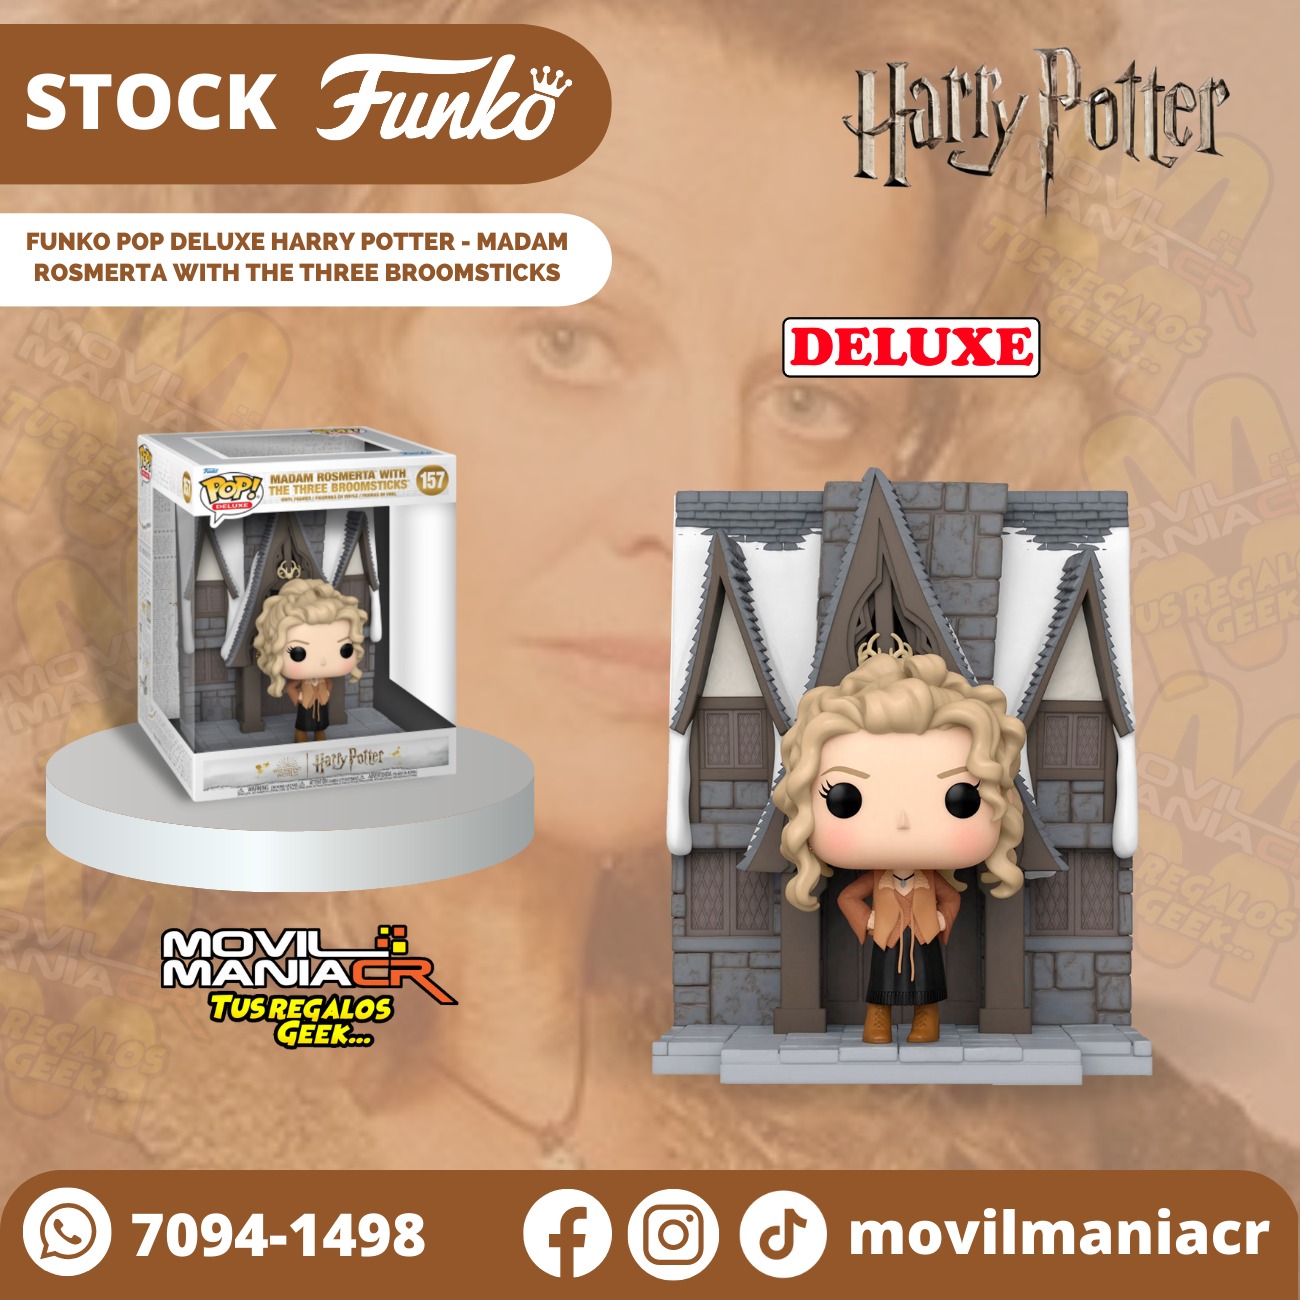 Funko Pop Deluxe Harry Potter Madam Rosmerta with the Three Broomsticks #157